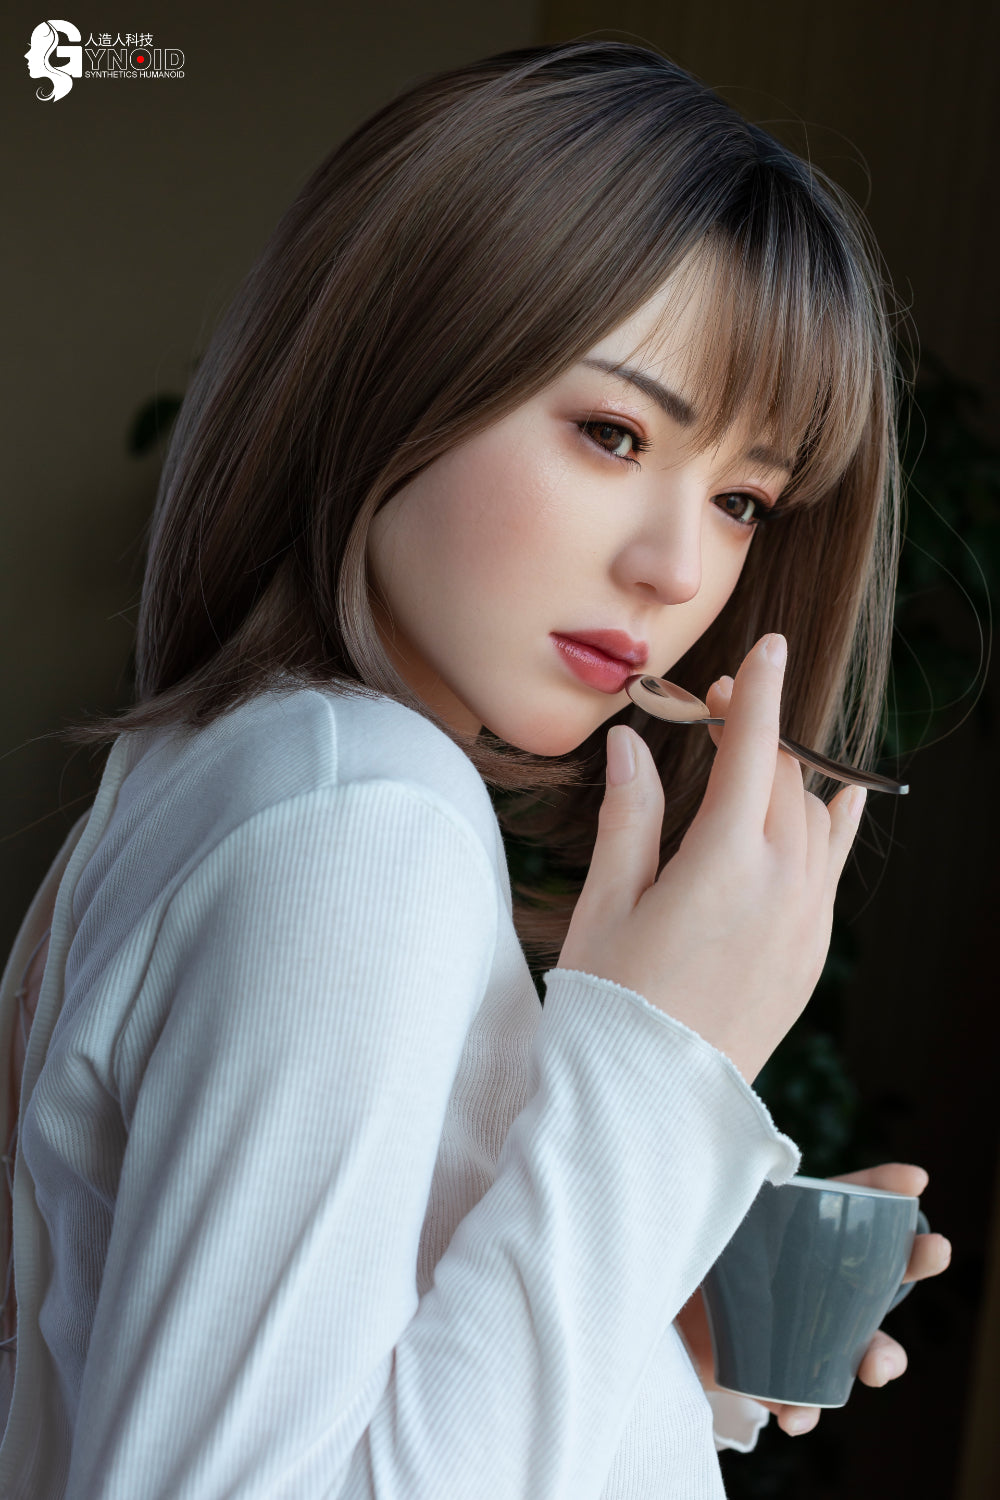 Gynoid Doll 162 cm Silicone - Wan Ying | Buy Sex Dolls at DOLLS ACTUALLY